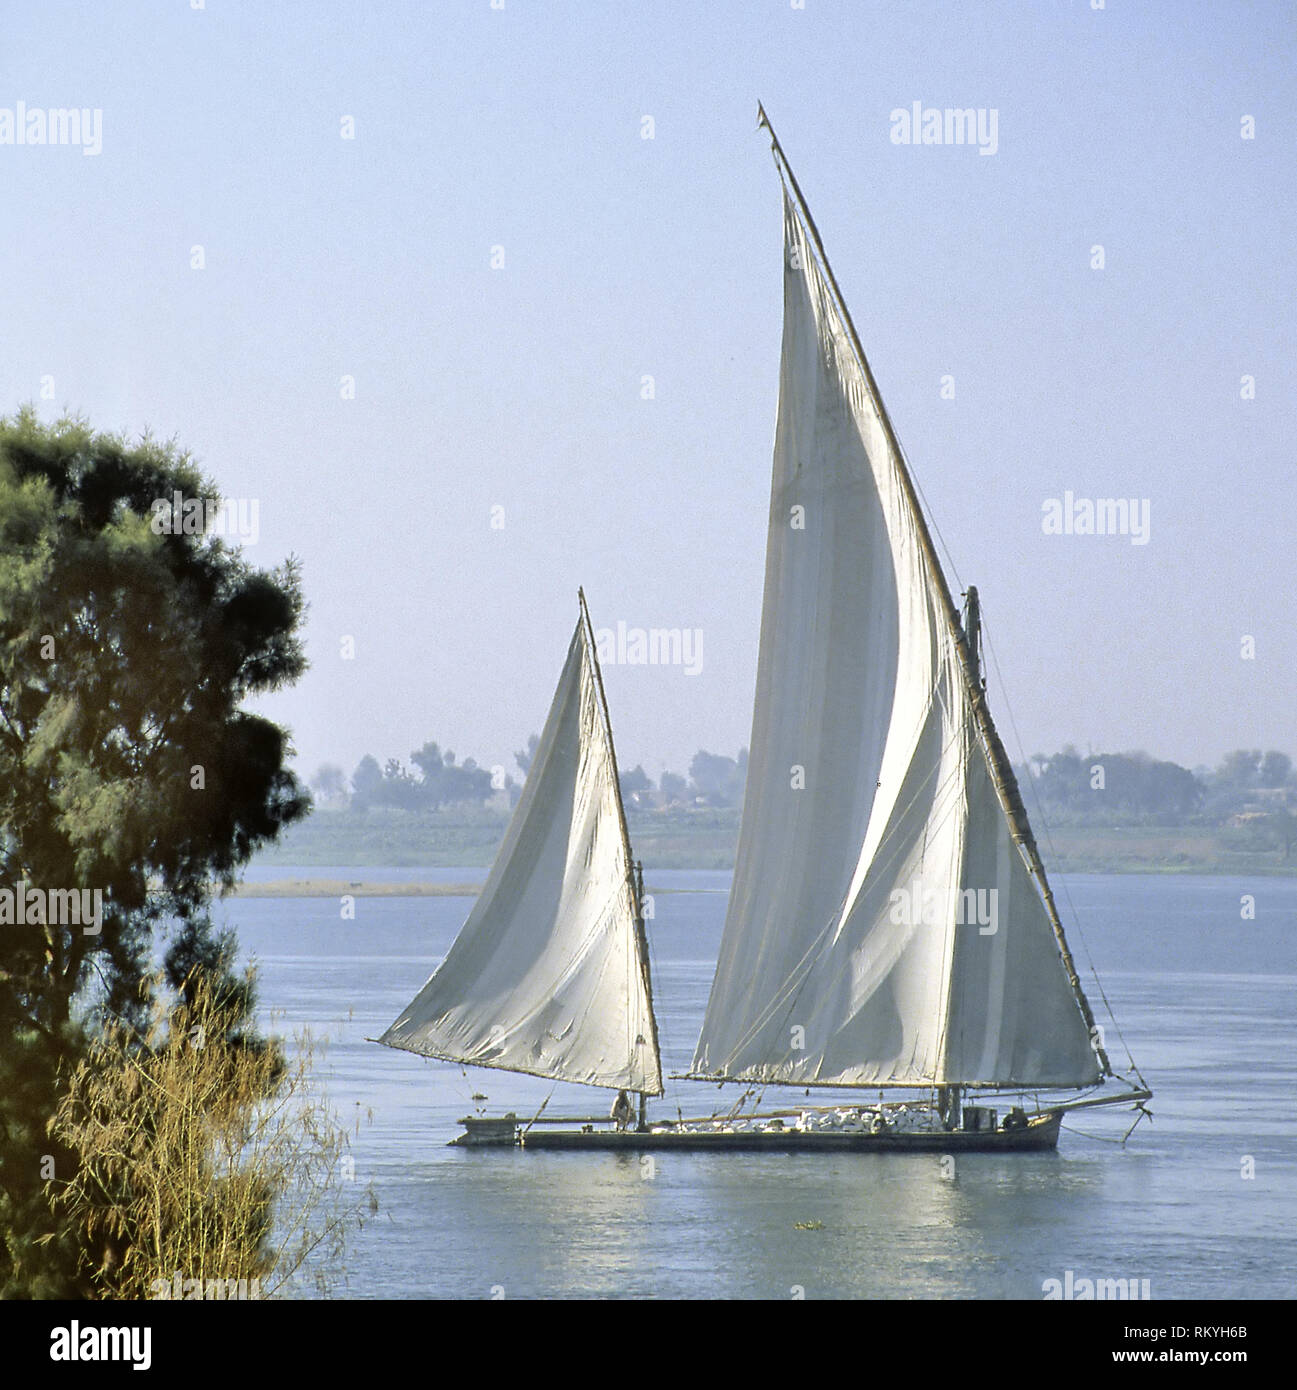 Egyptian felluca going down the Nile with clear blue sky Stock Photo